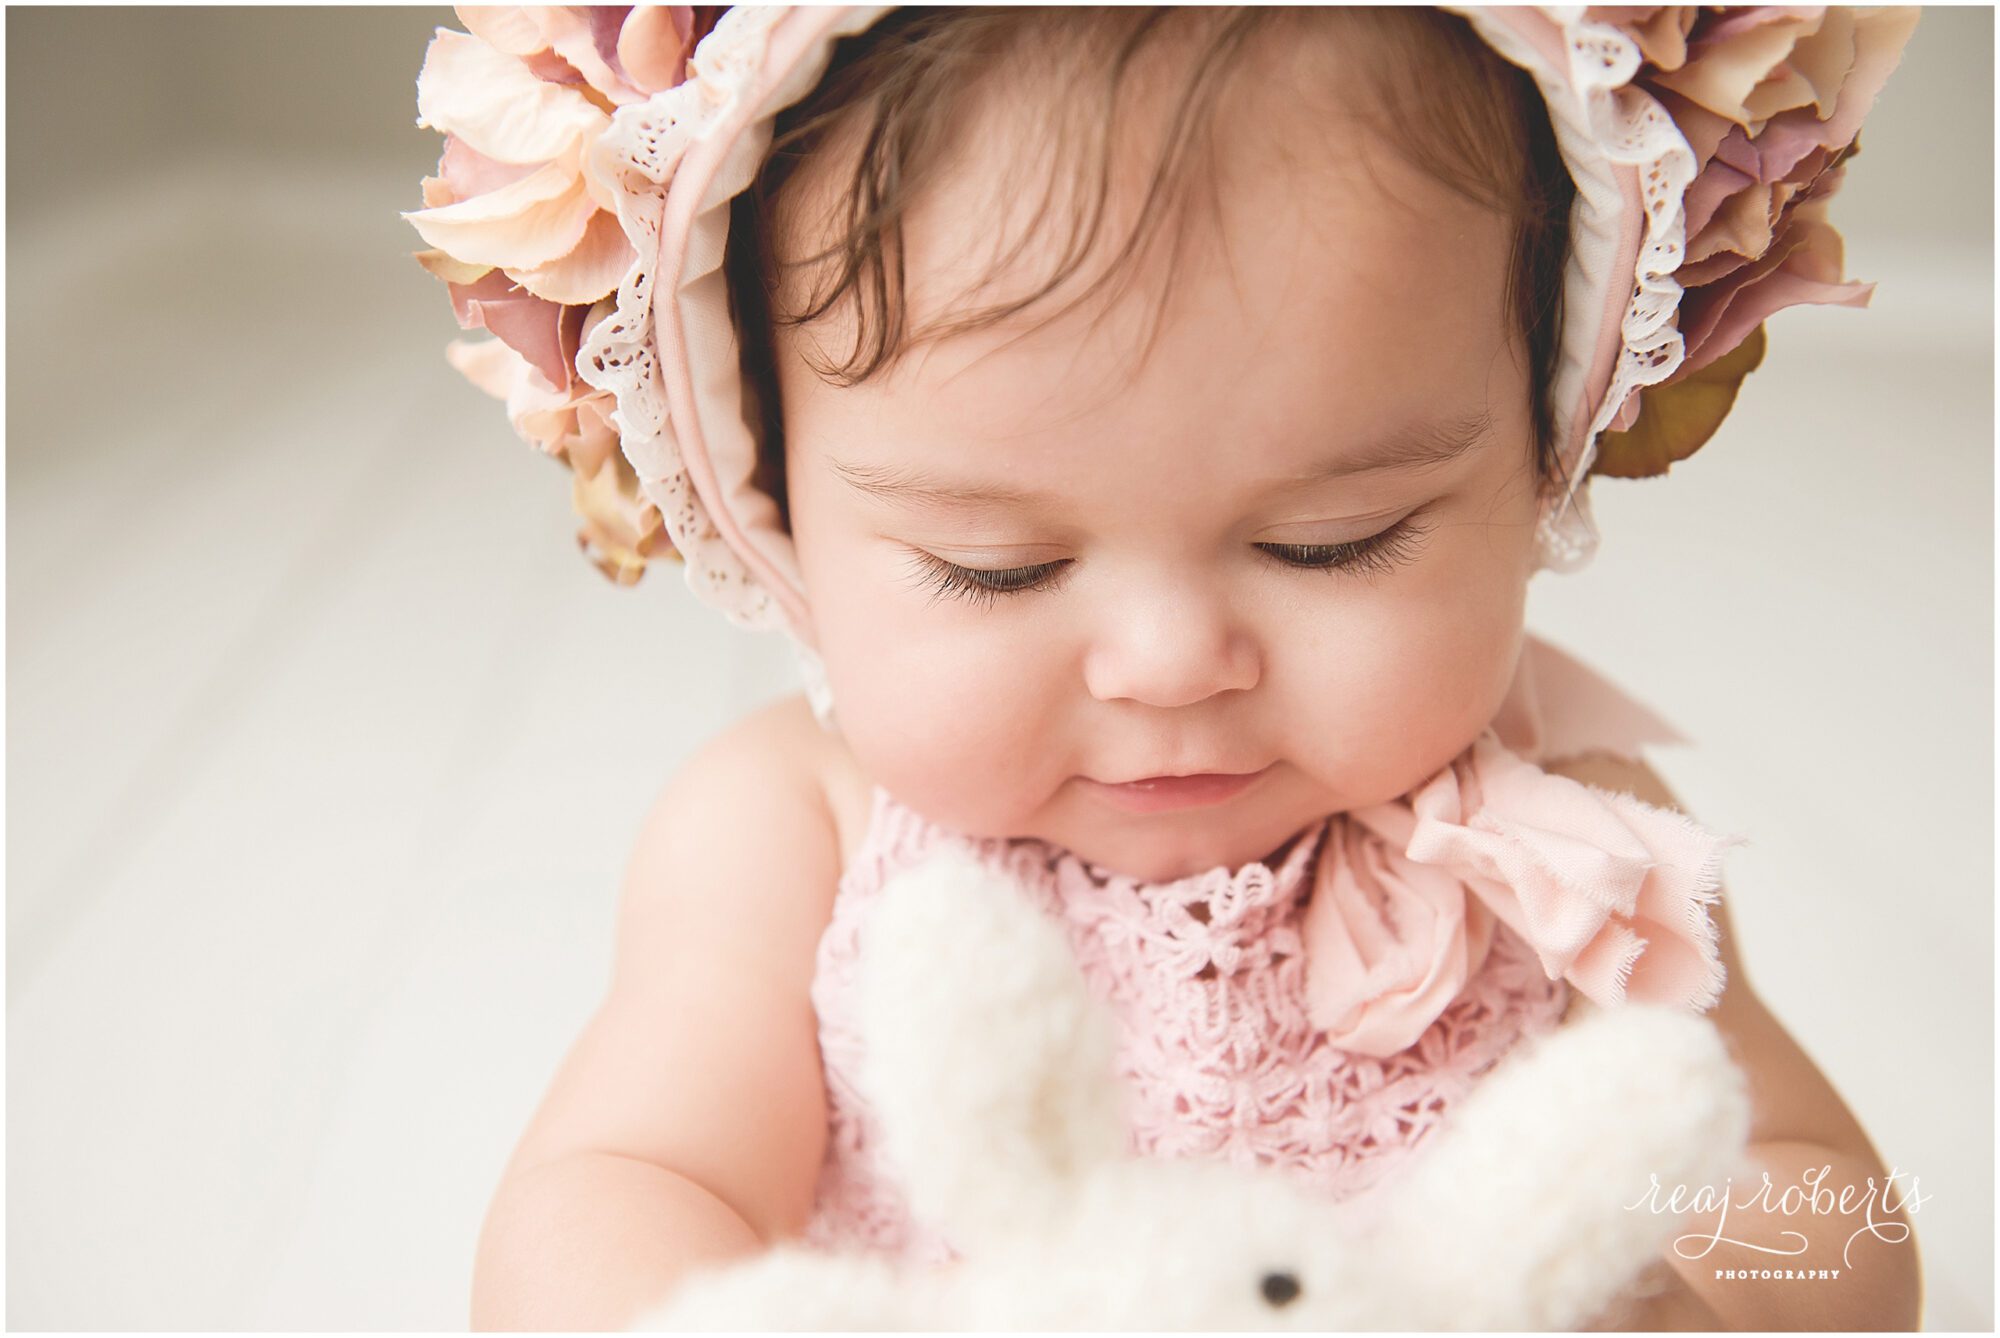 Floral baby bonnet | Chandler Baby Photographer | Reaj Roberts Photography